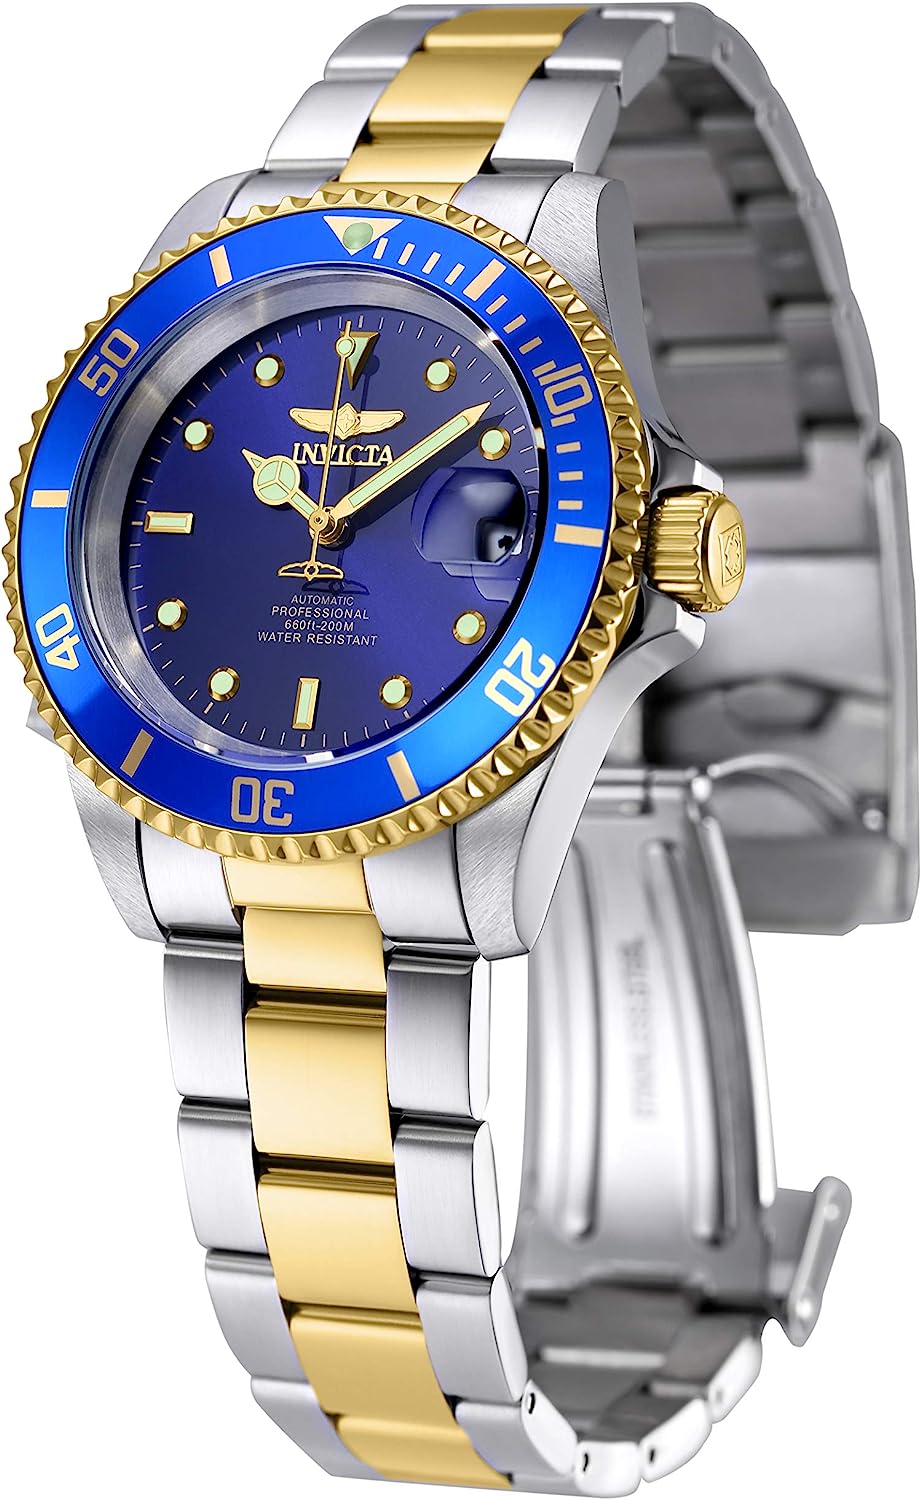 Invicta Men's Pro Diver 40mm Steel and Gold Tone Stainless Steel Automatic Watch with Coin Edge Bezel, Two Tone/Blue (Model: 8928OB)